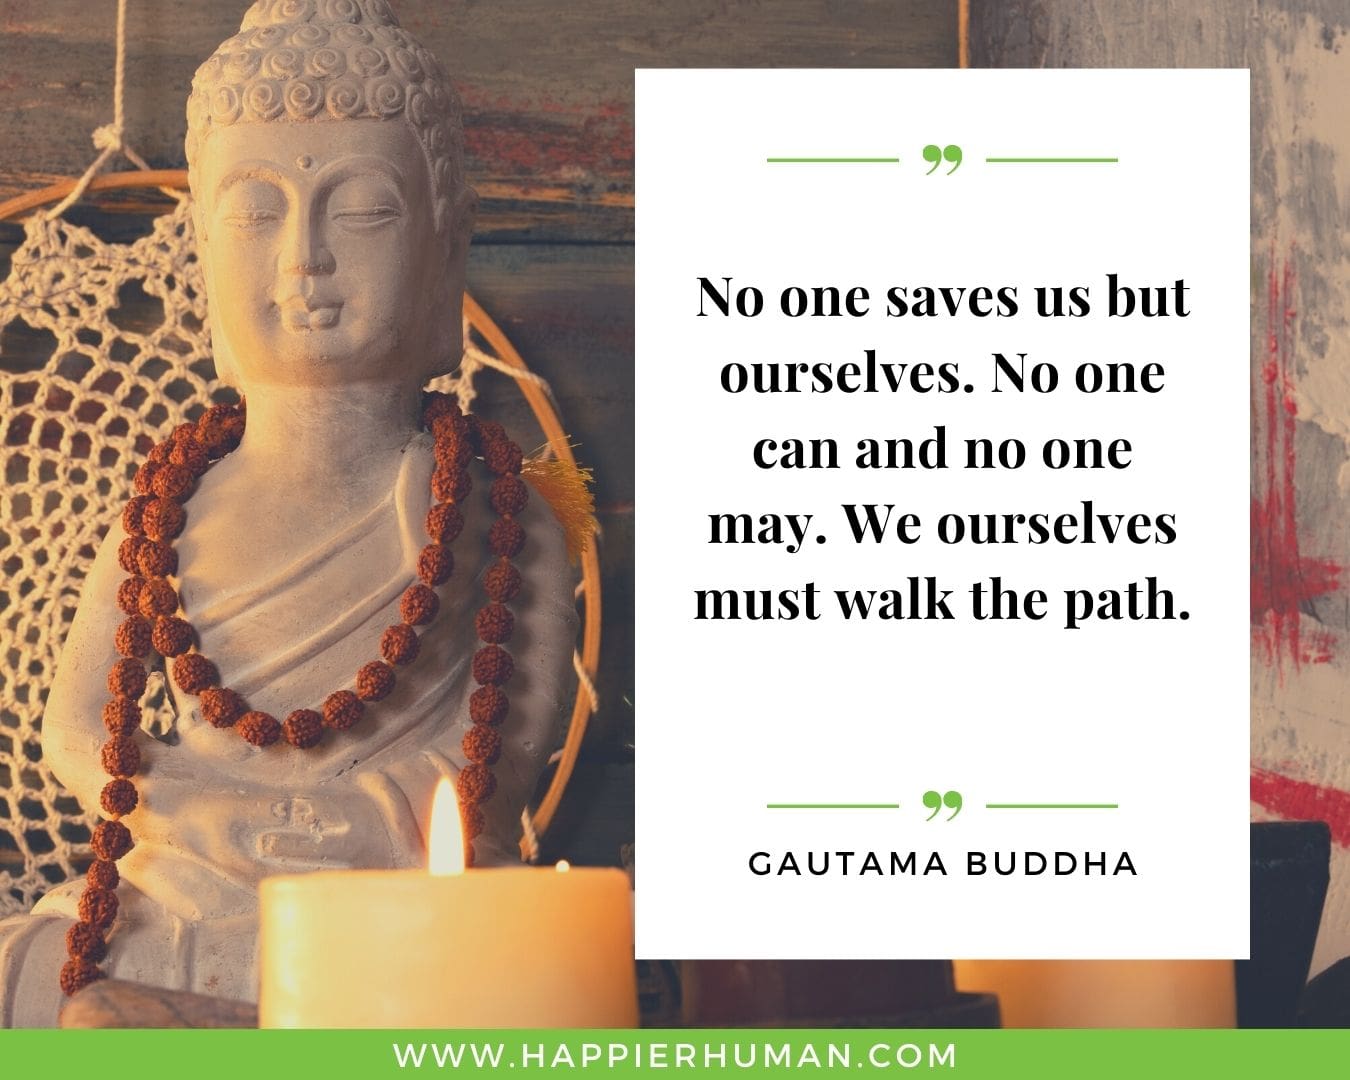 Loneliness Quotes - “No one saves us but ourselves. No one can and no one may. We ourselves must walk the path.” – Gautama Buddha